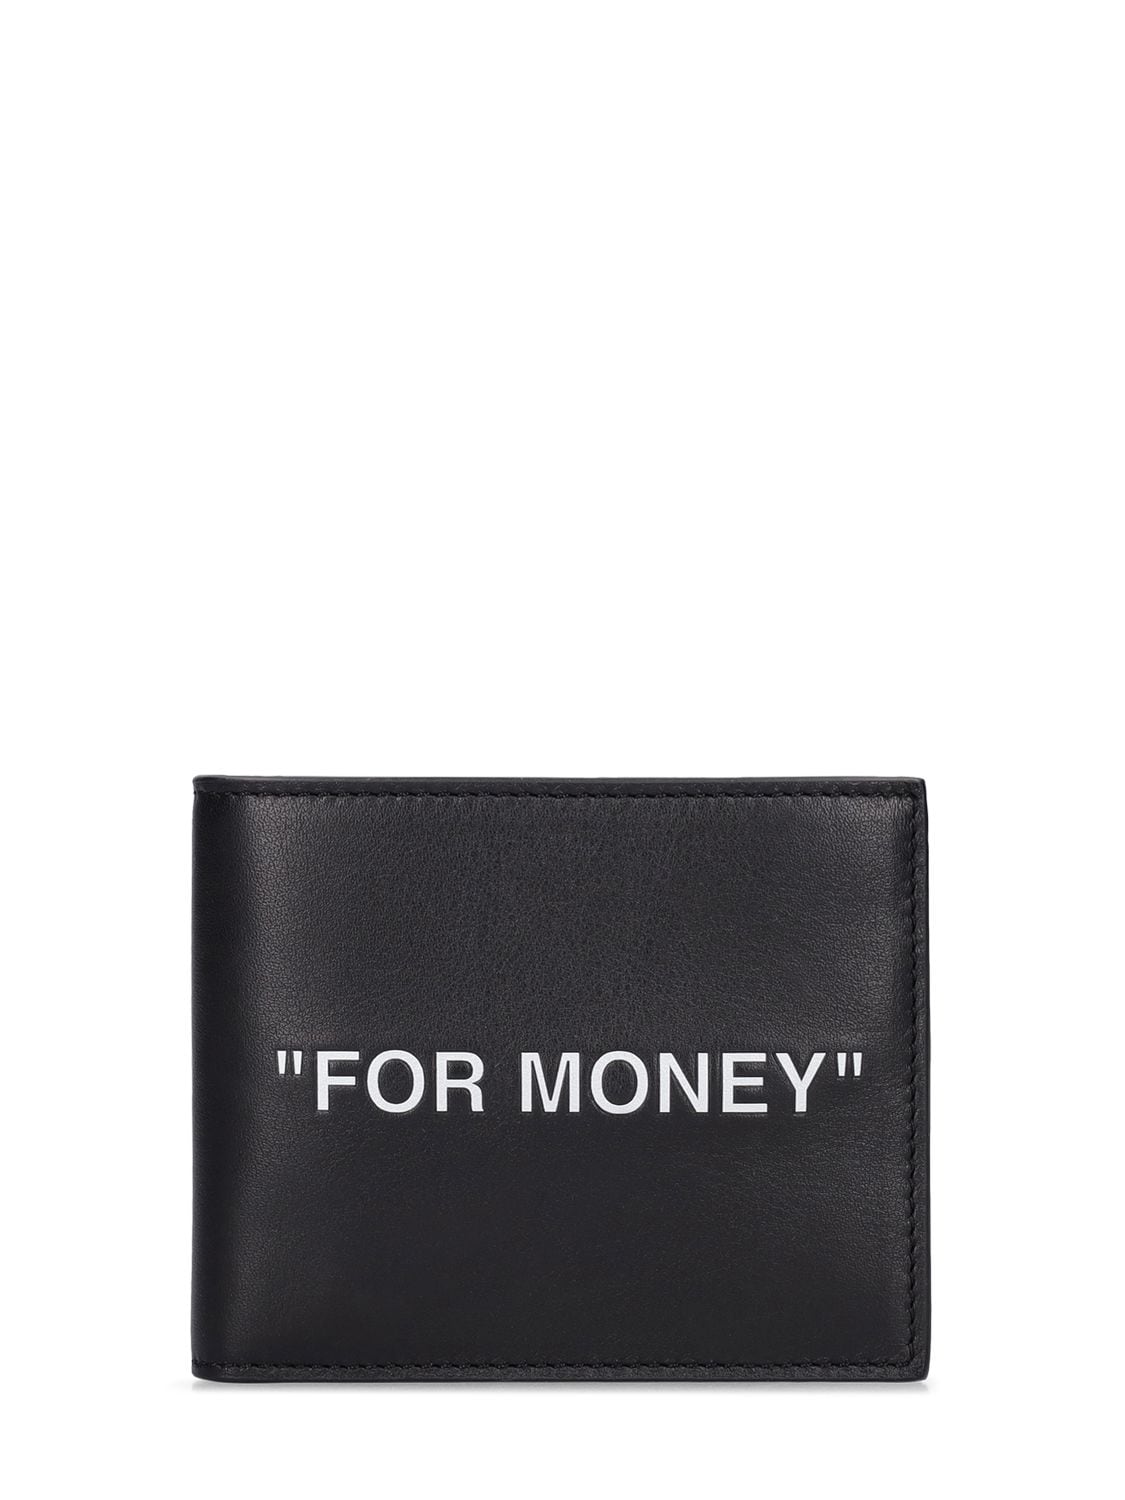 Image of "for Money" Leather Billfold Wallet